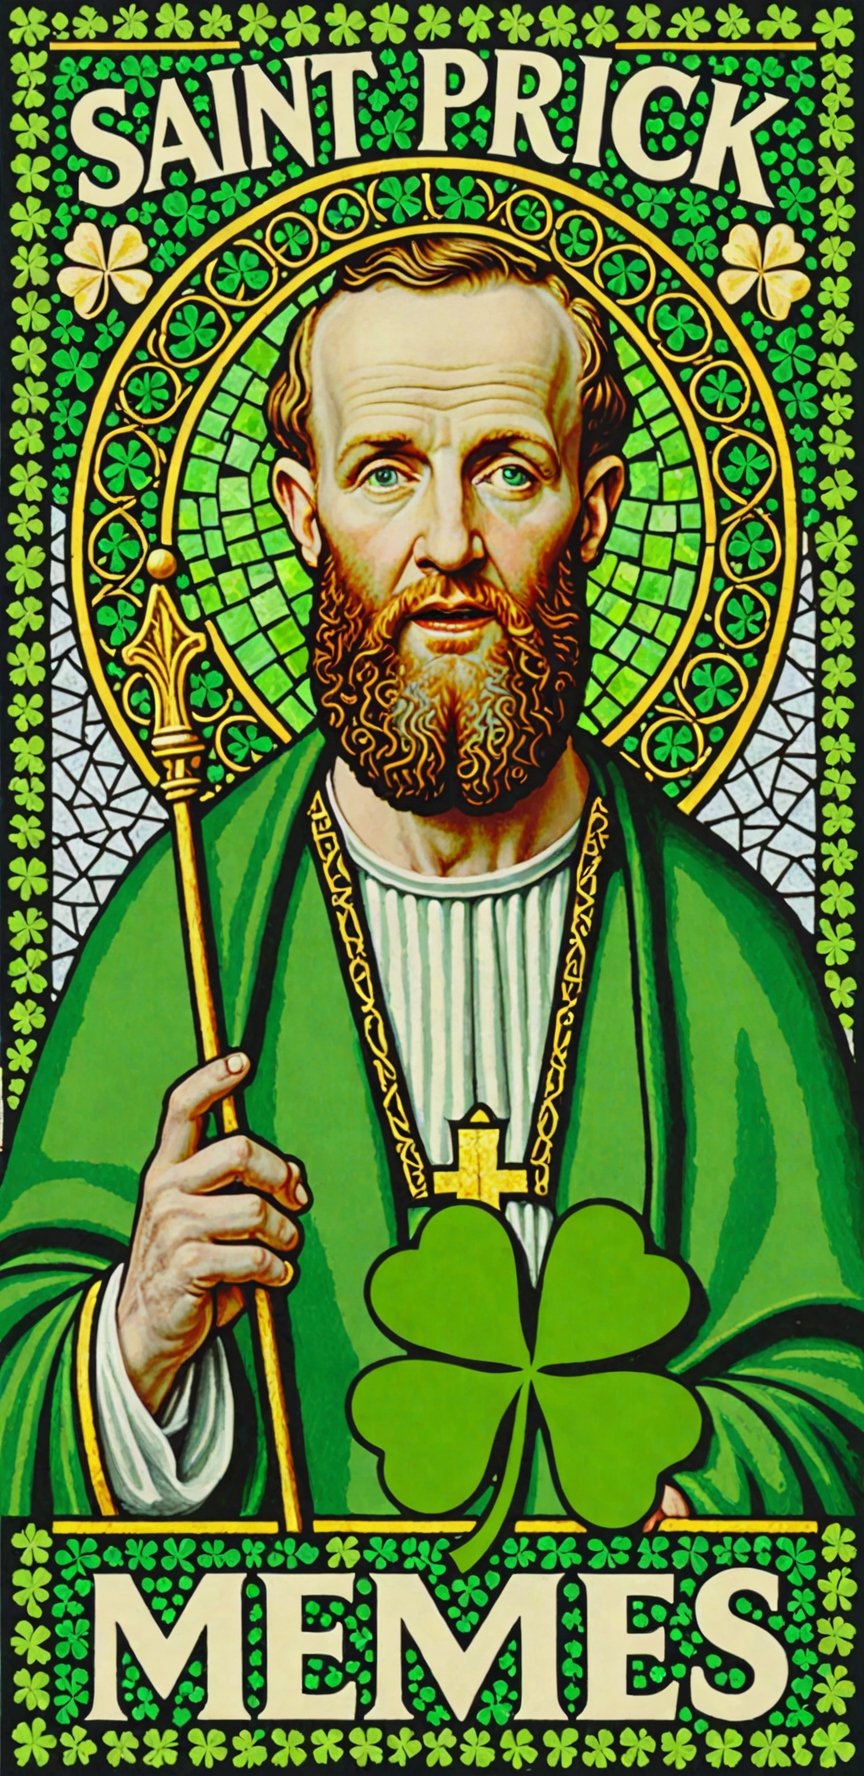 (masterpiece, best quality, ultra-detailed), Image of Saint Patrick, four leaf clover mosaic, with text that says "Memes XL"